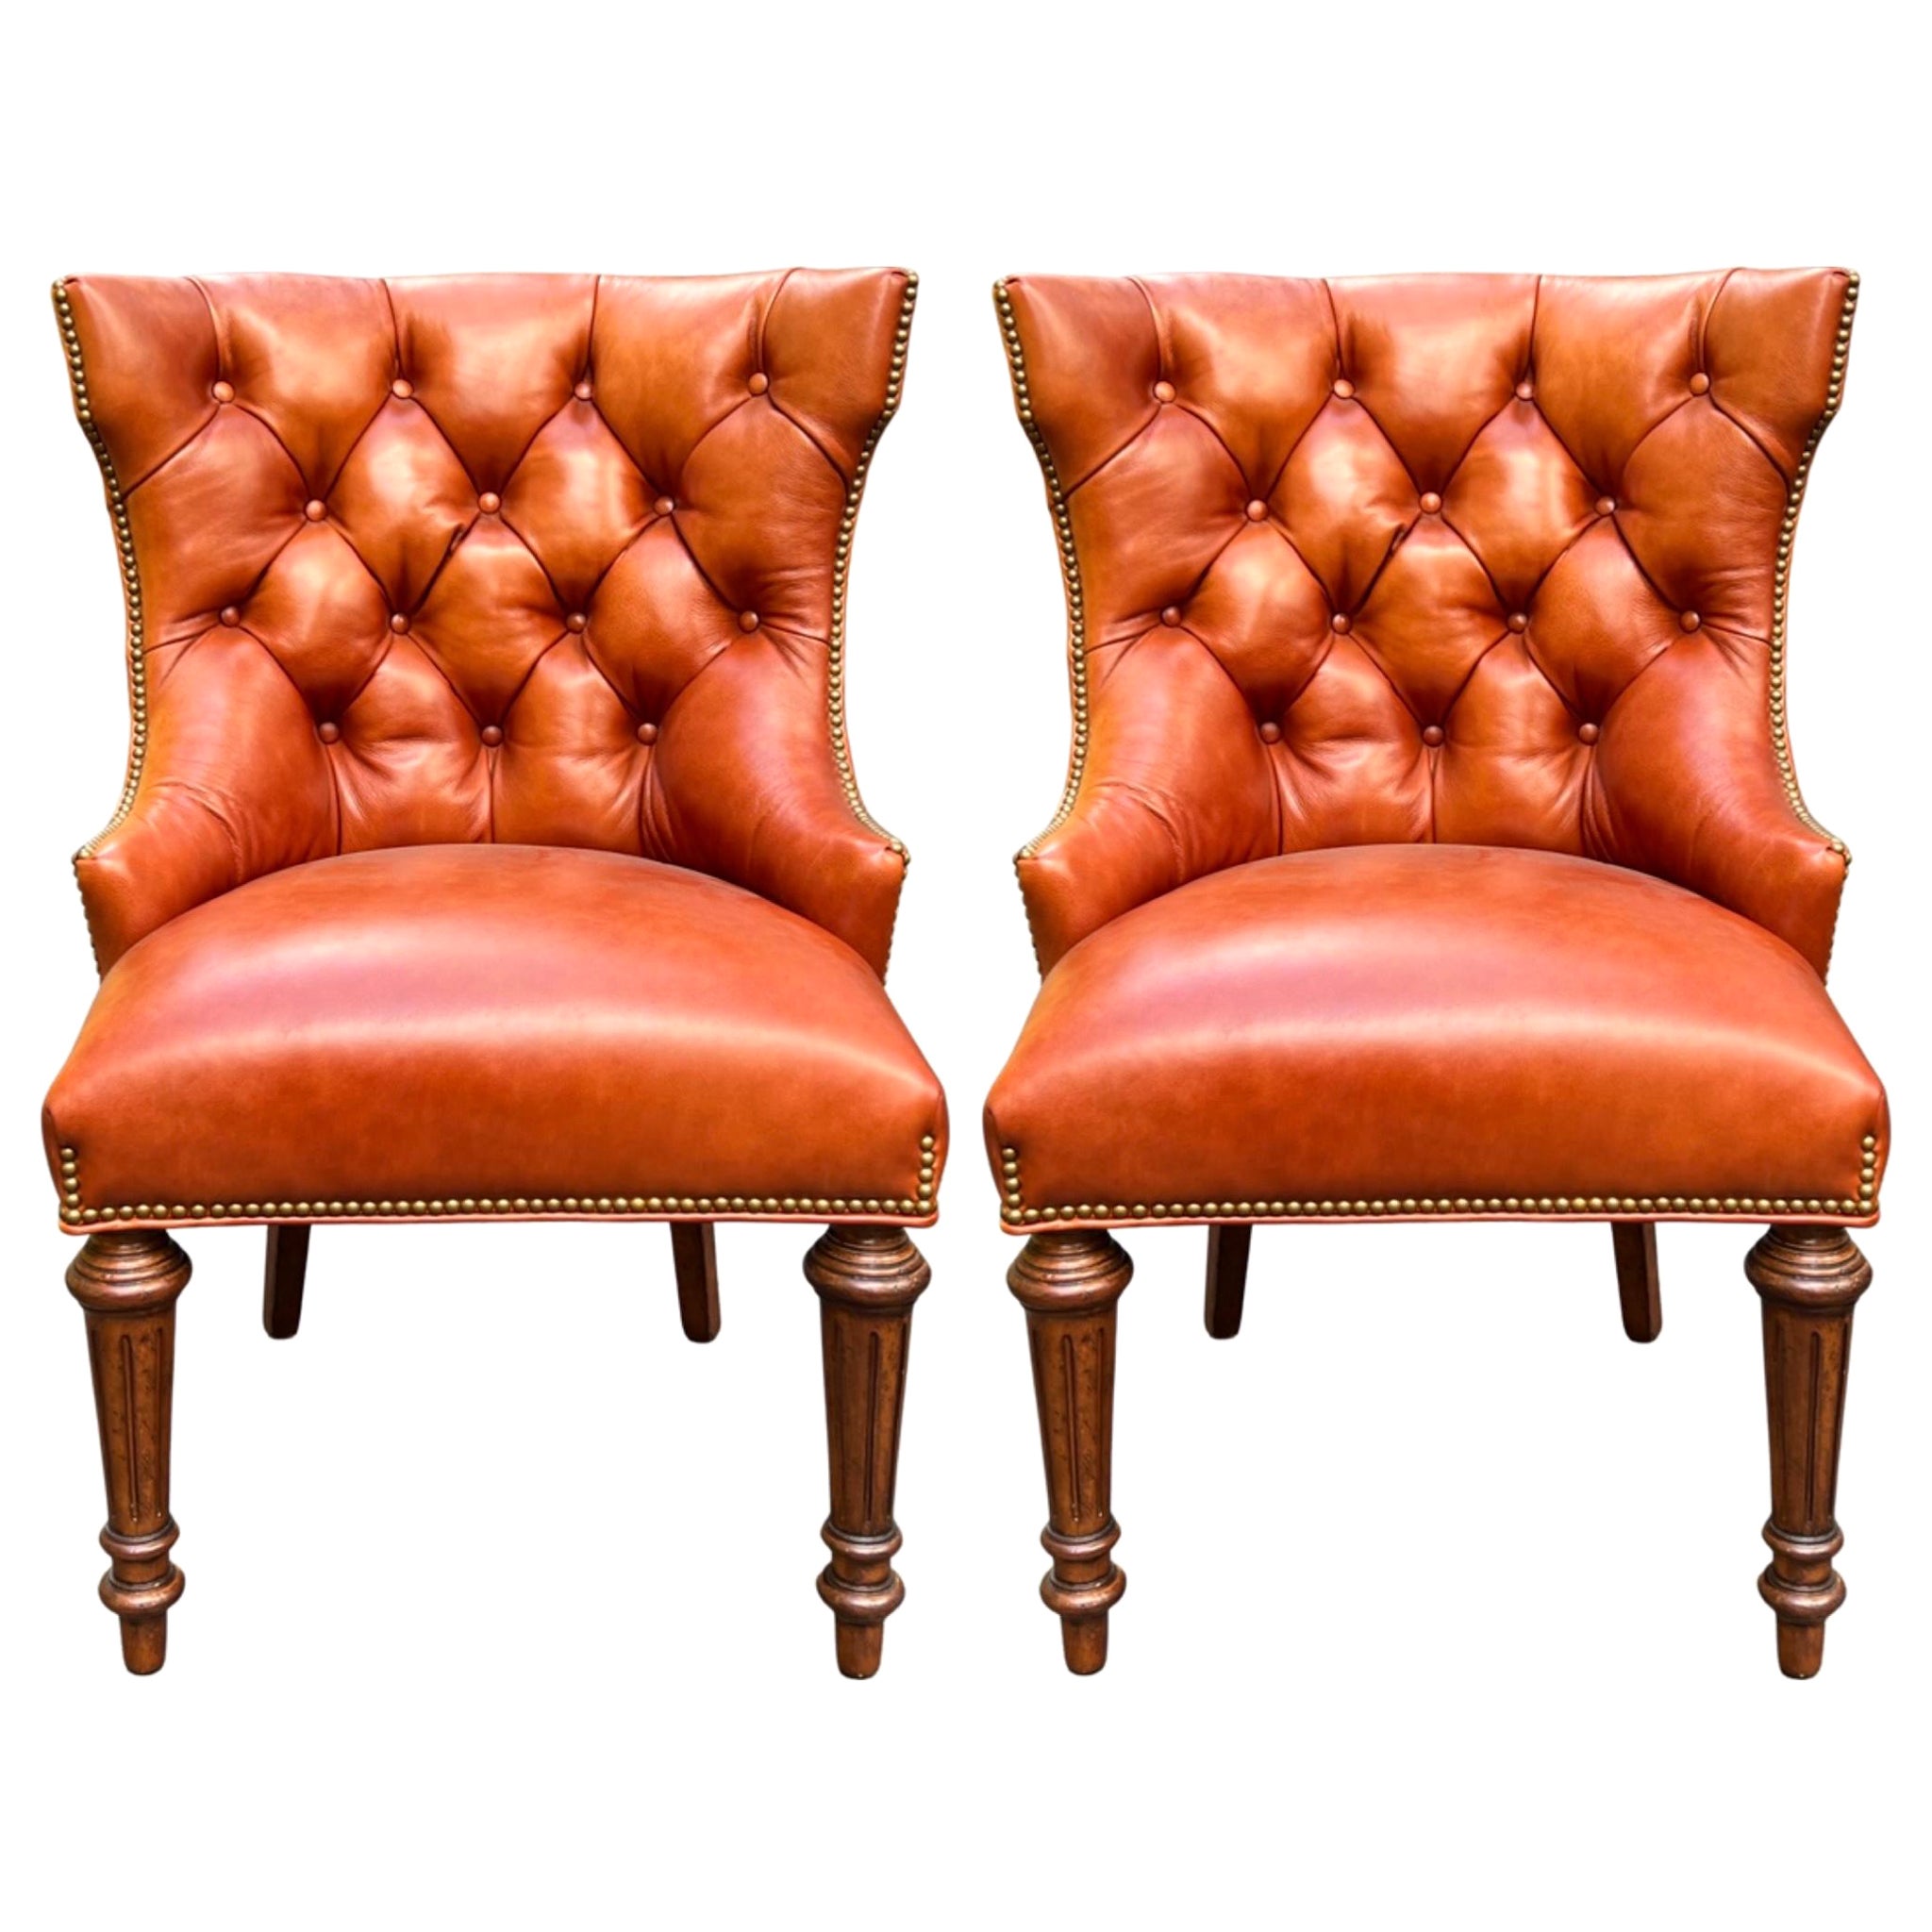 Late 20th-C. Chesterfield Style Leather Chairs Att. to Hancock and Moore, Pair